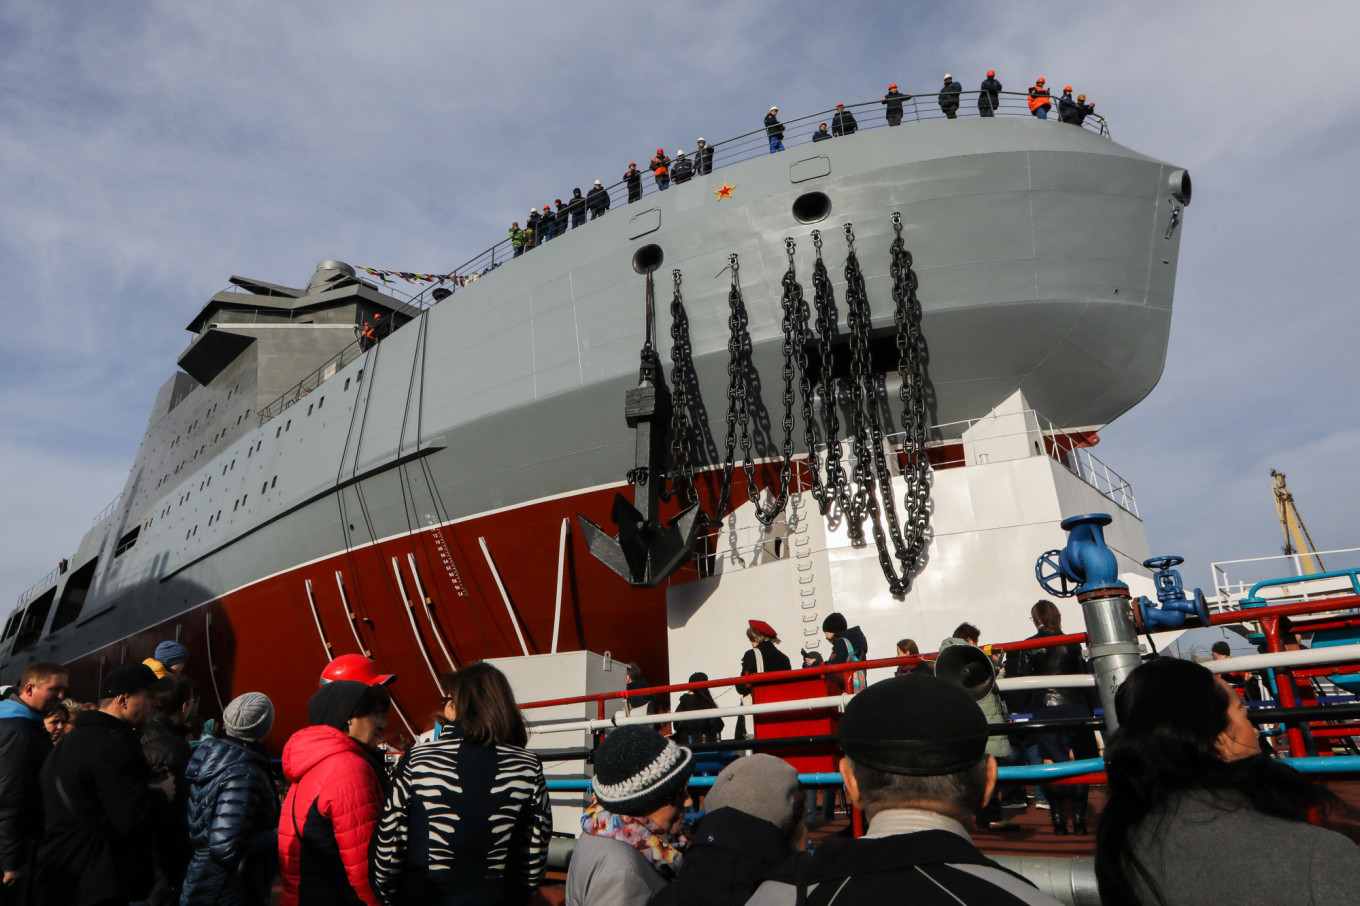 Russia Launches New Battle Ship to ‘Defend National Interests’ in the Arctic